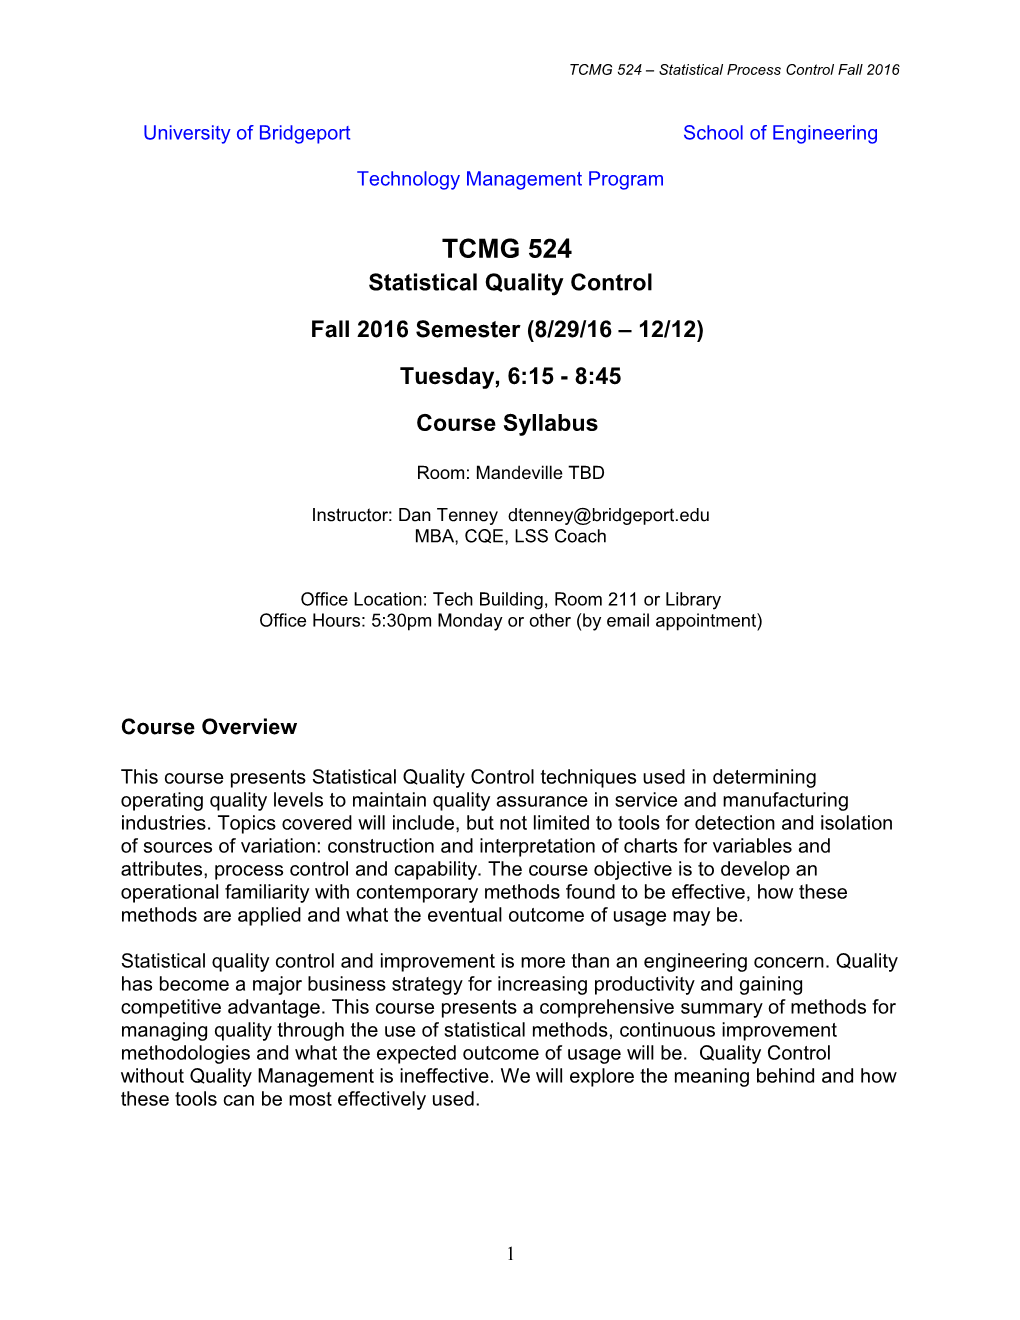 TCMG 524 Statistical Process Controlfall 2016